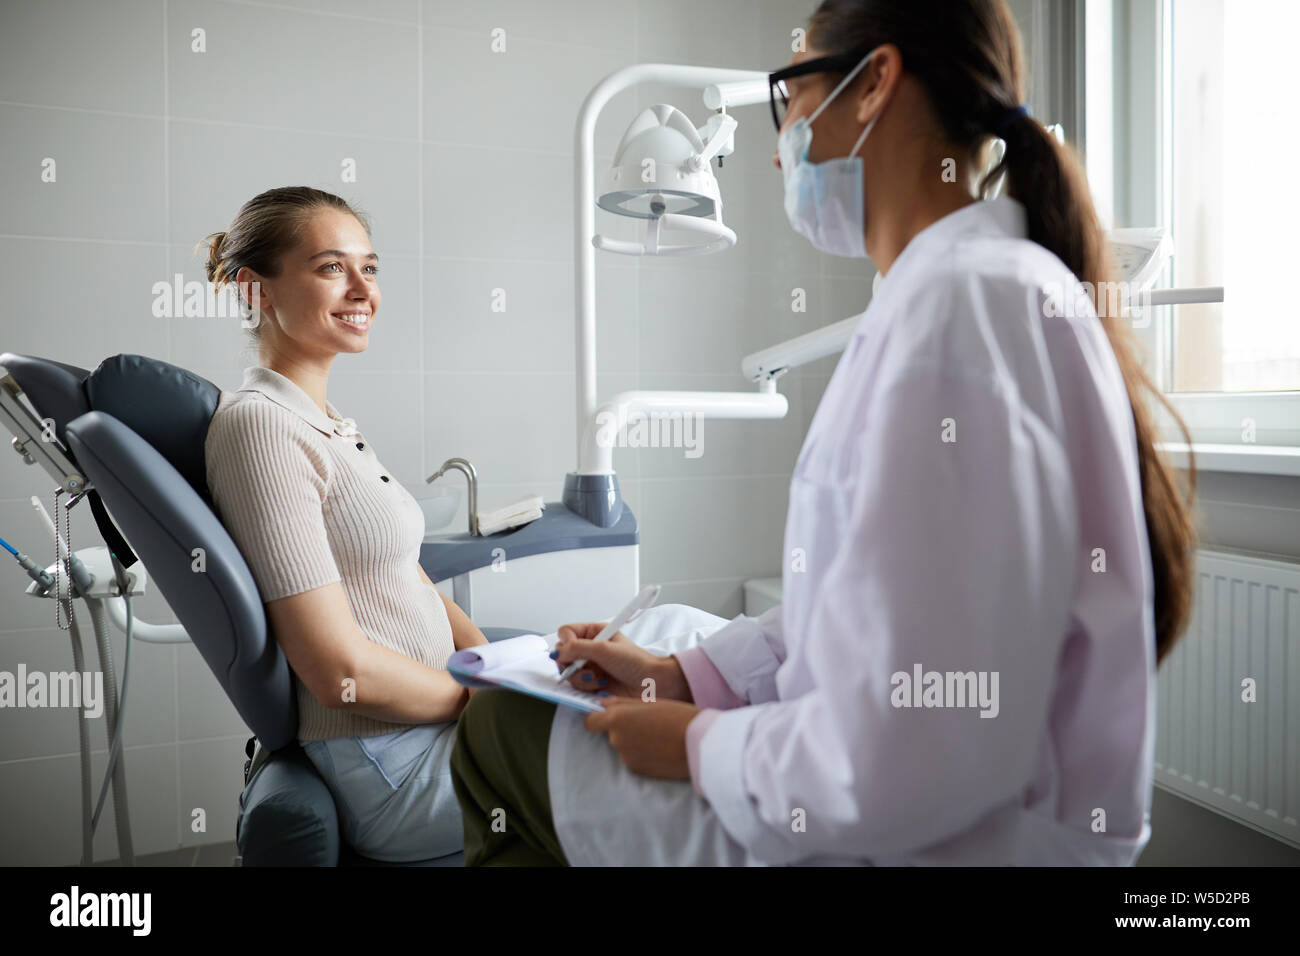 Side view portrait of pretty young woman sitting in dental chair and smiling at doctor during consultation in clinic, copy space Stock Photo